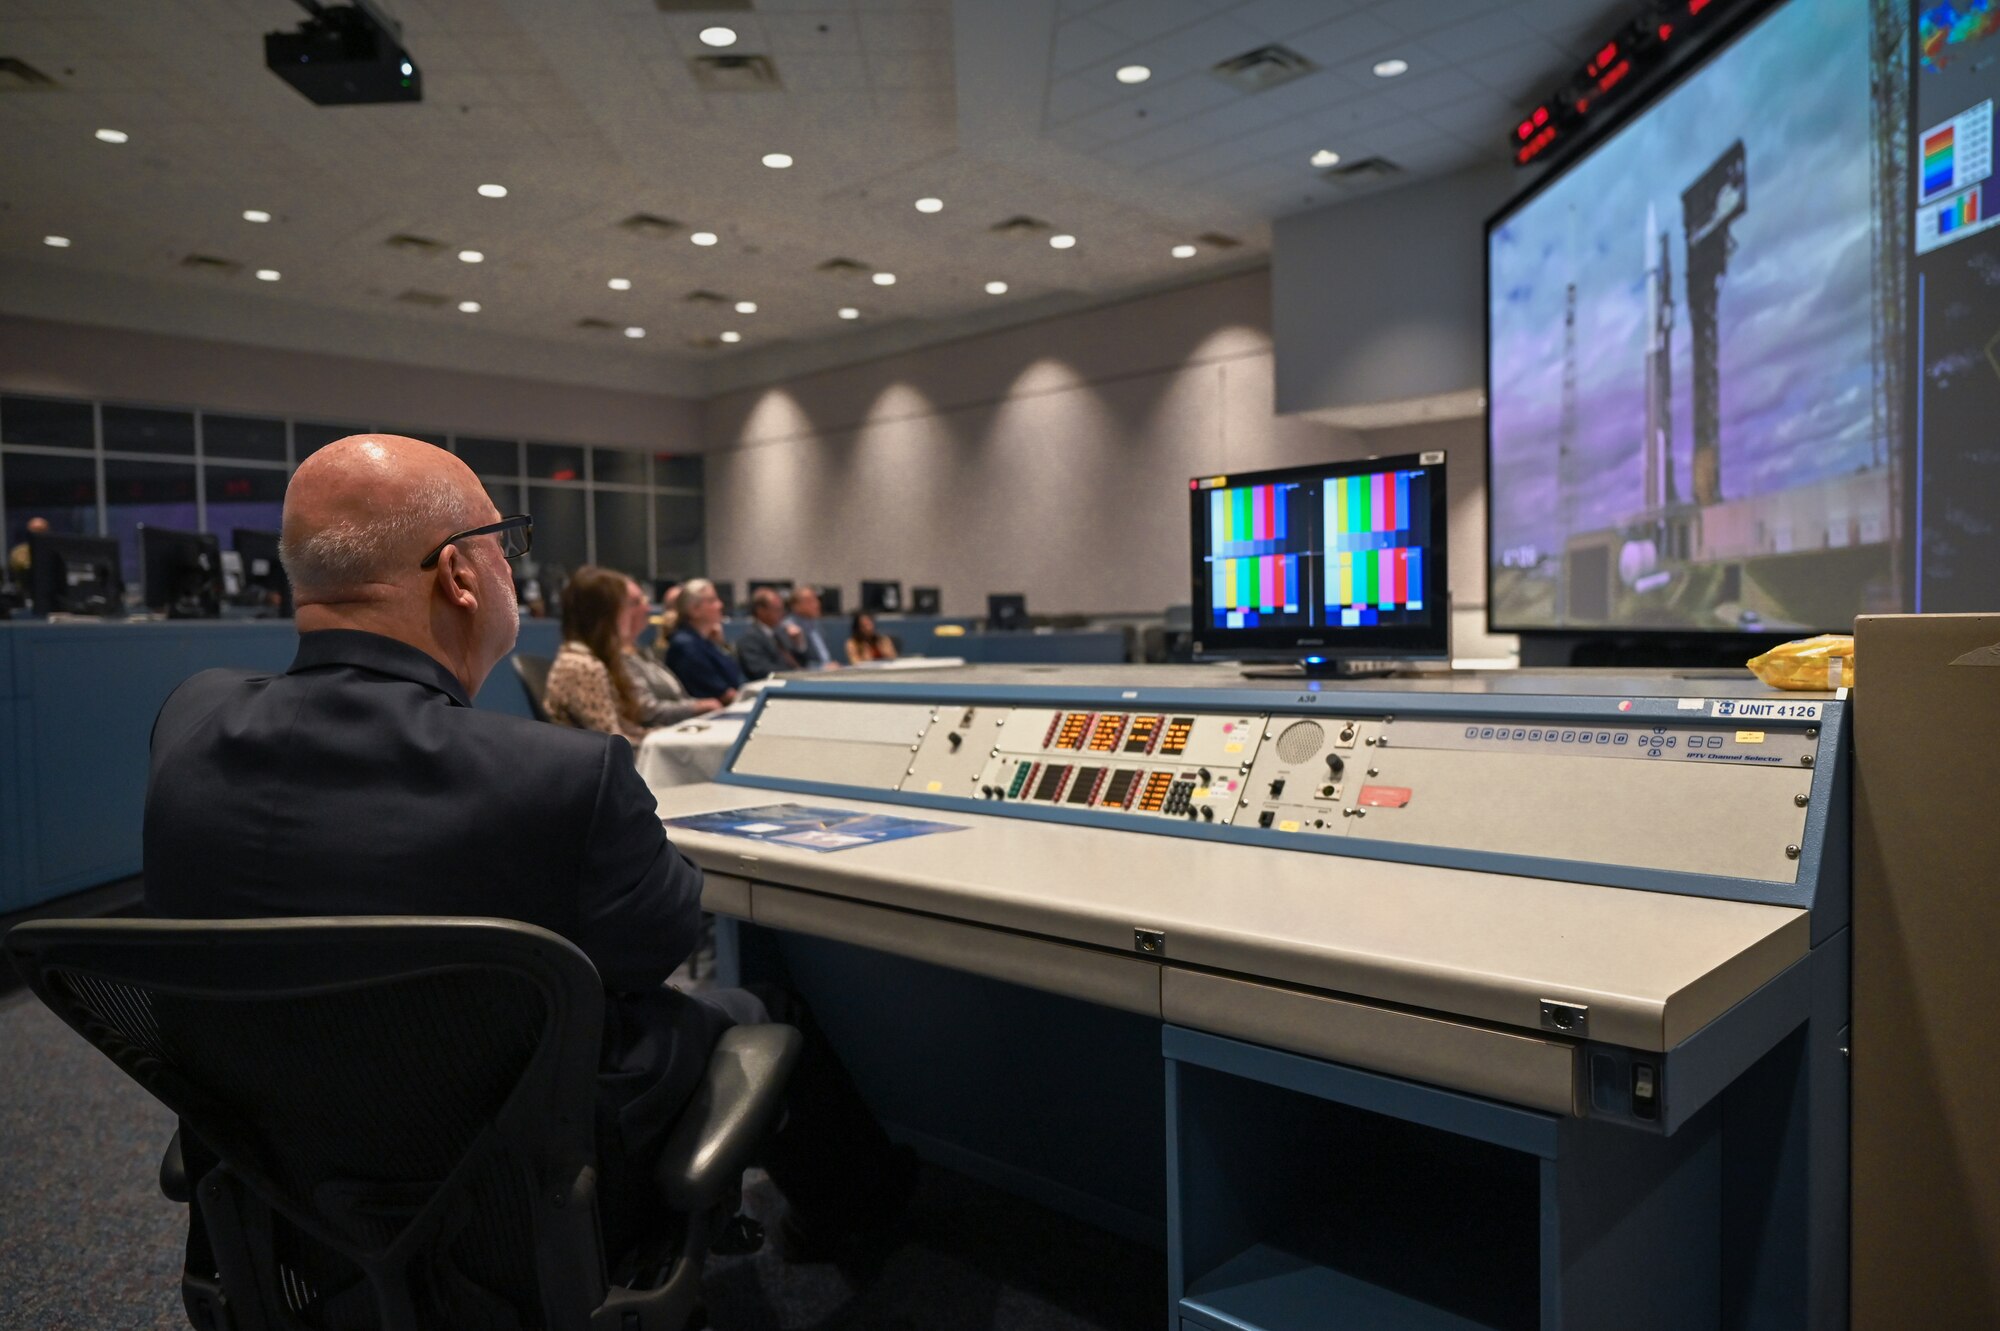 Acting Secretary of the Air Force John P. Roth, listens to a presentation in the Morrell Operations Center at Cape Canaveral Space Force Station, Fla., May 17, 2021. During his visit, Roth toured several facilities at CCSFS and met with Airmen and Guardians supporting space launch operations. (U.S. Space Force photo by Airman 1st Class Thomas Sjoberg)